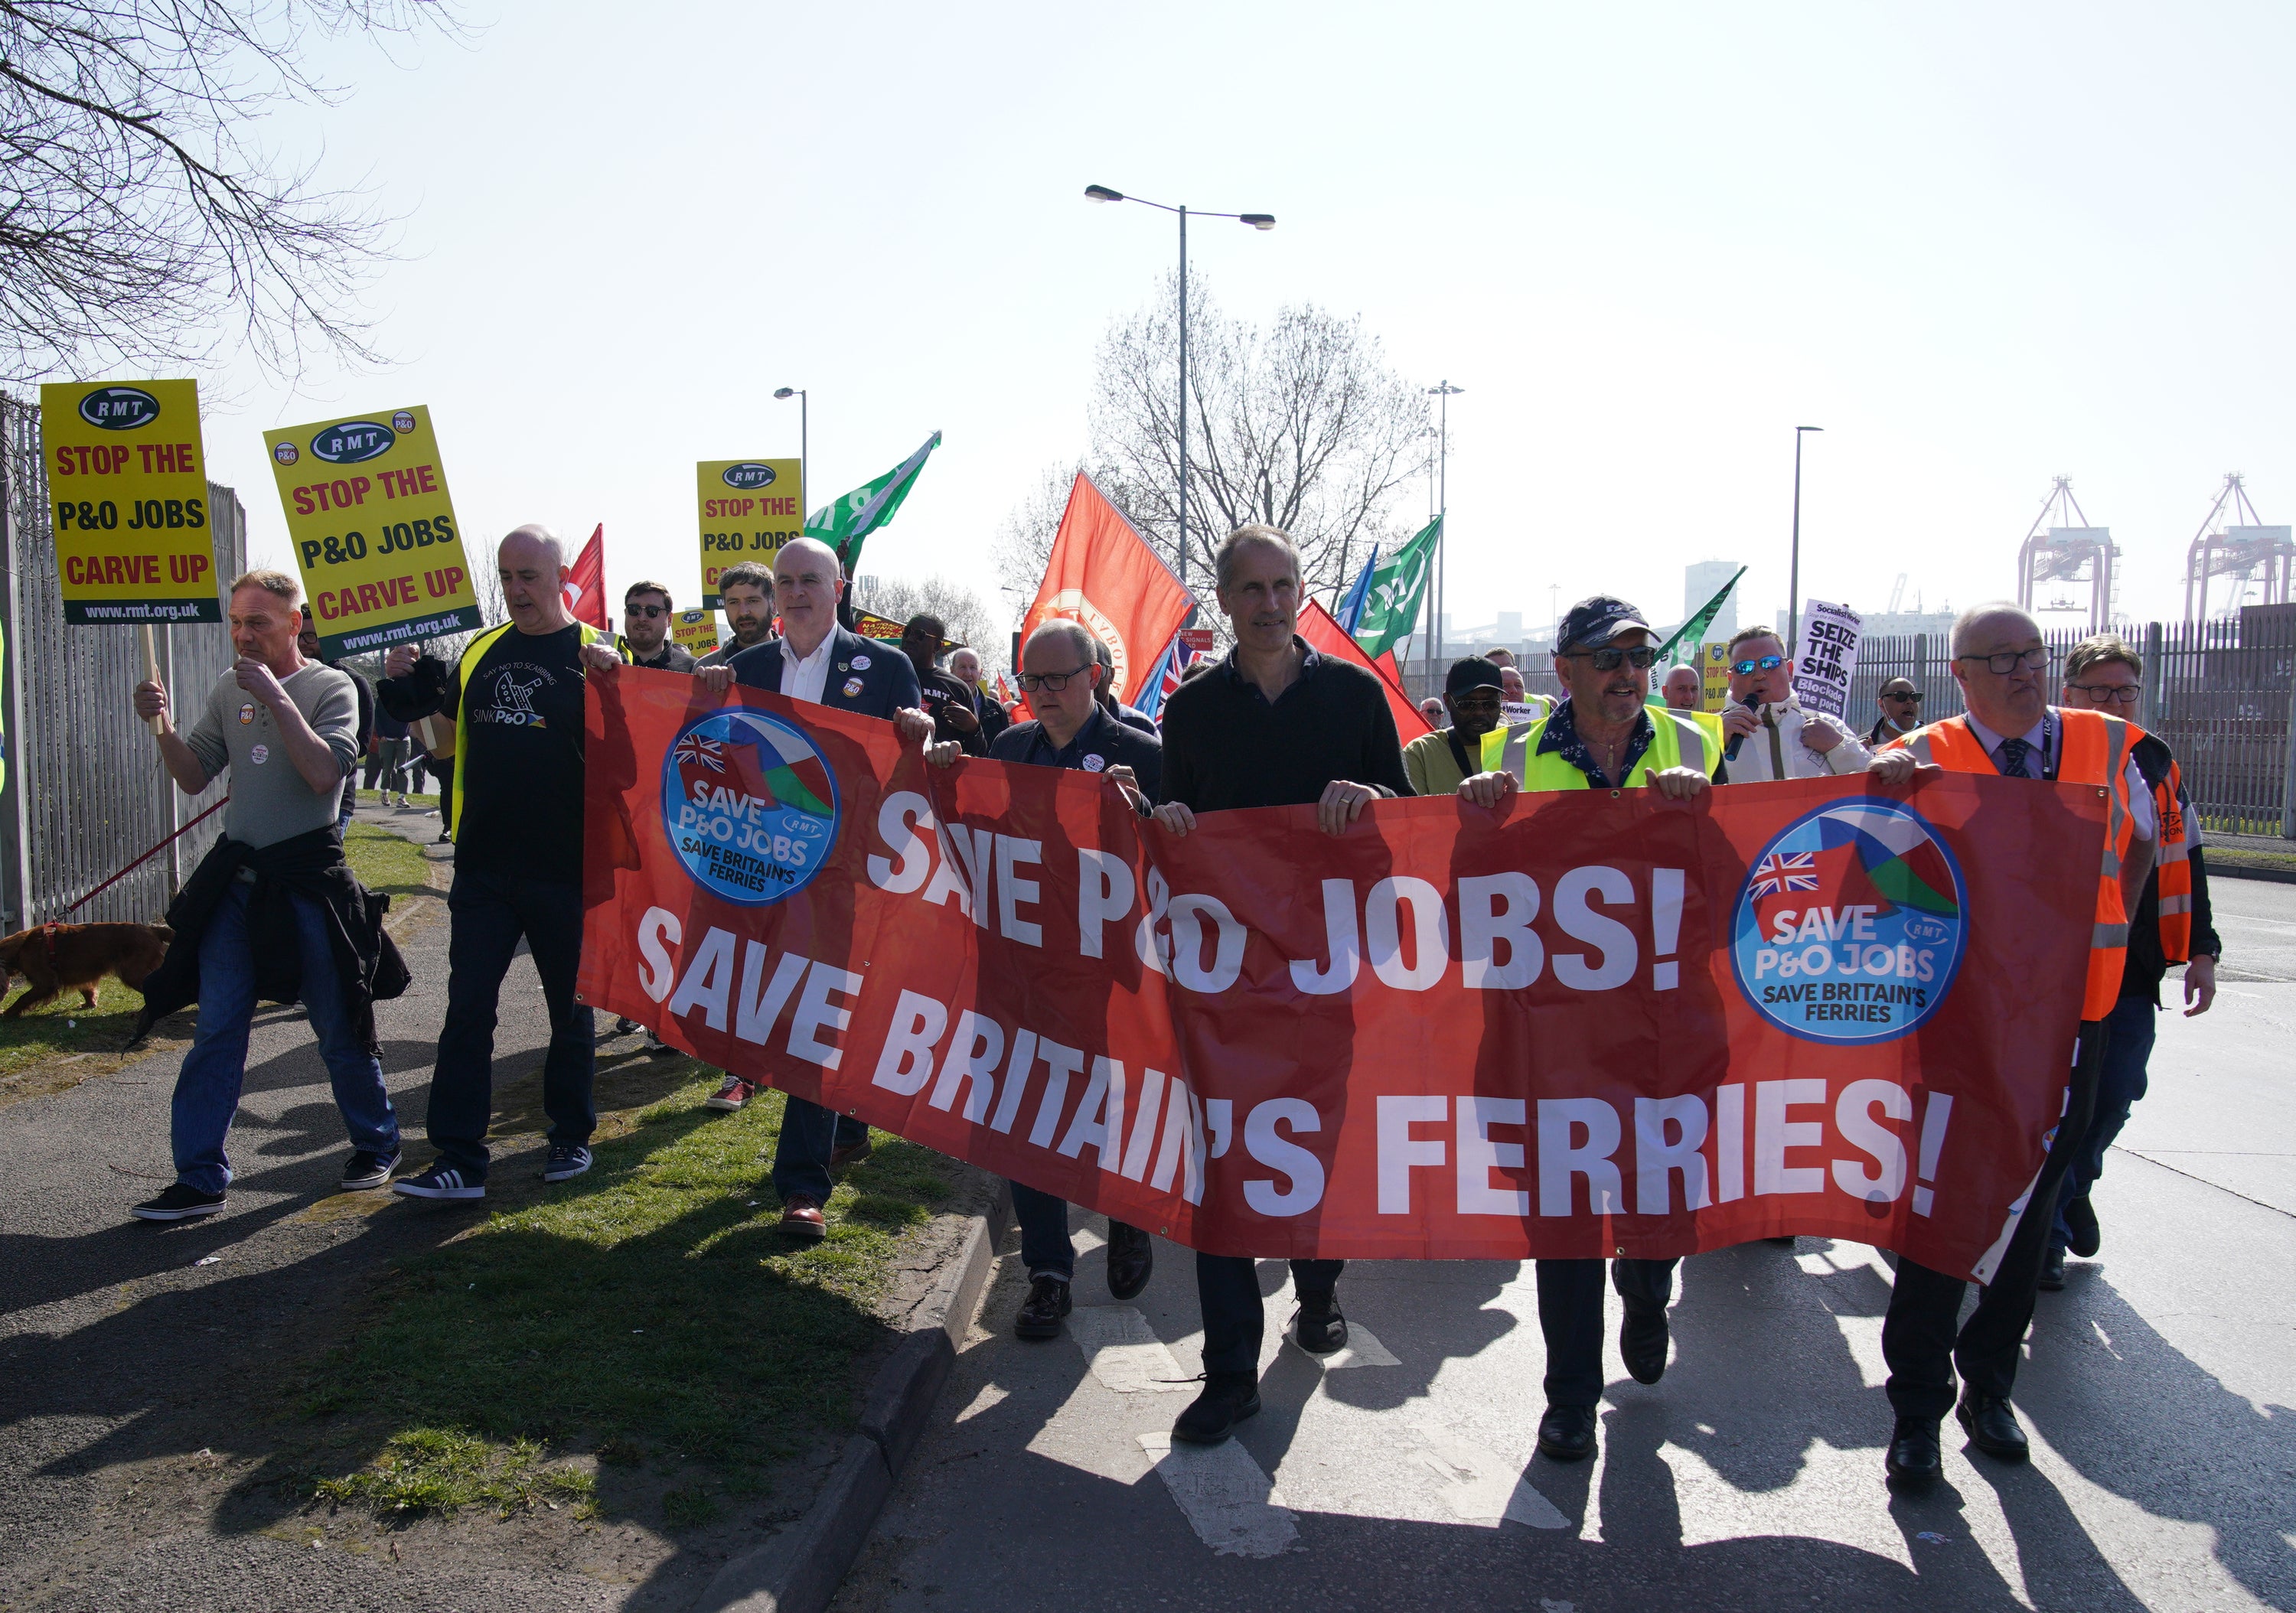 Protests took place at UK ports on Saturday against the sacking of ferry workers (Pete Byrne/PA)